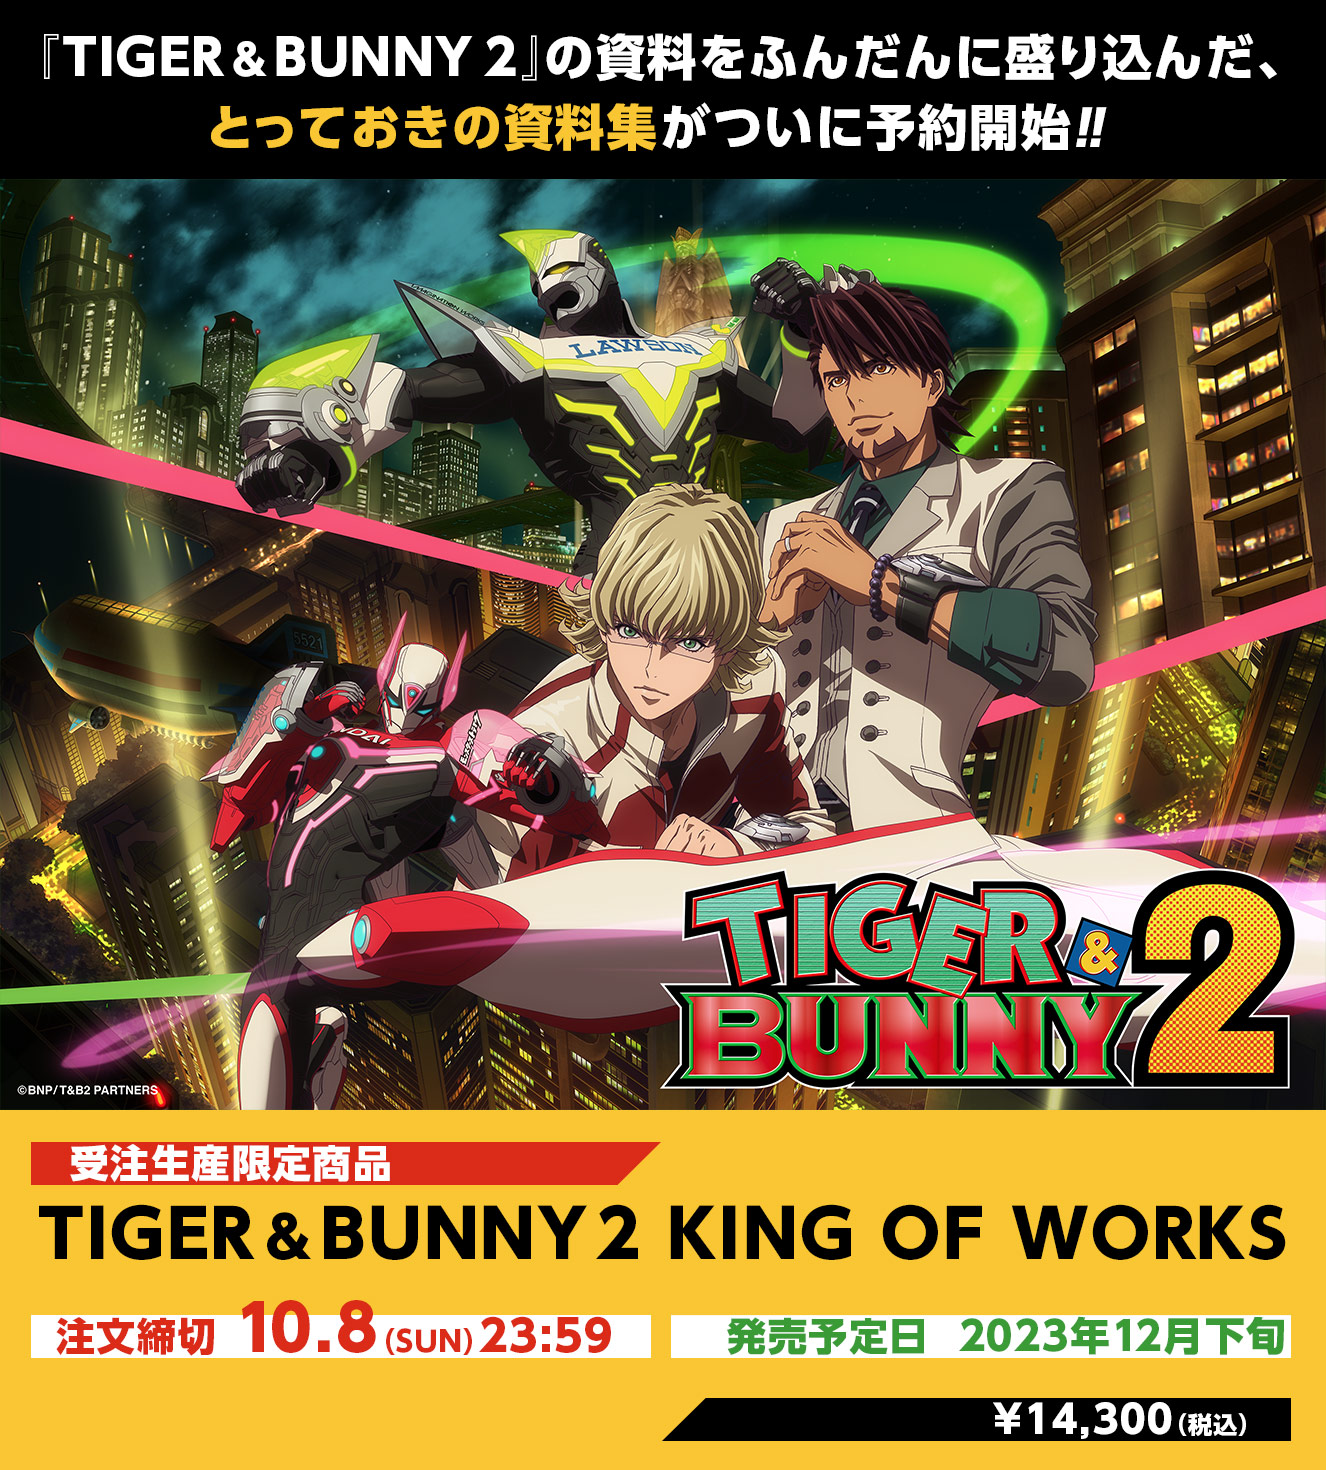 TIGER ＆ BUNNY 2 KING OF WORKS